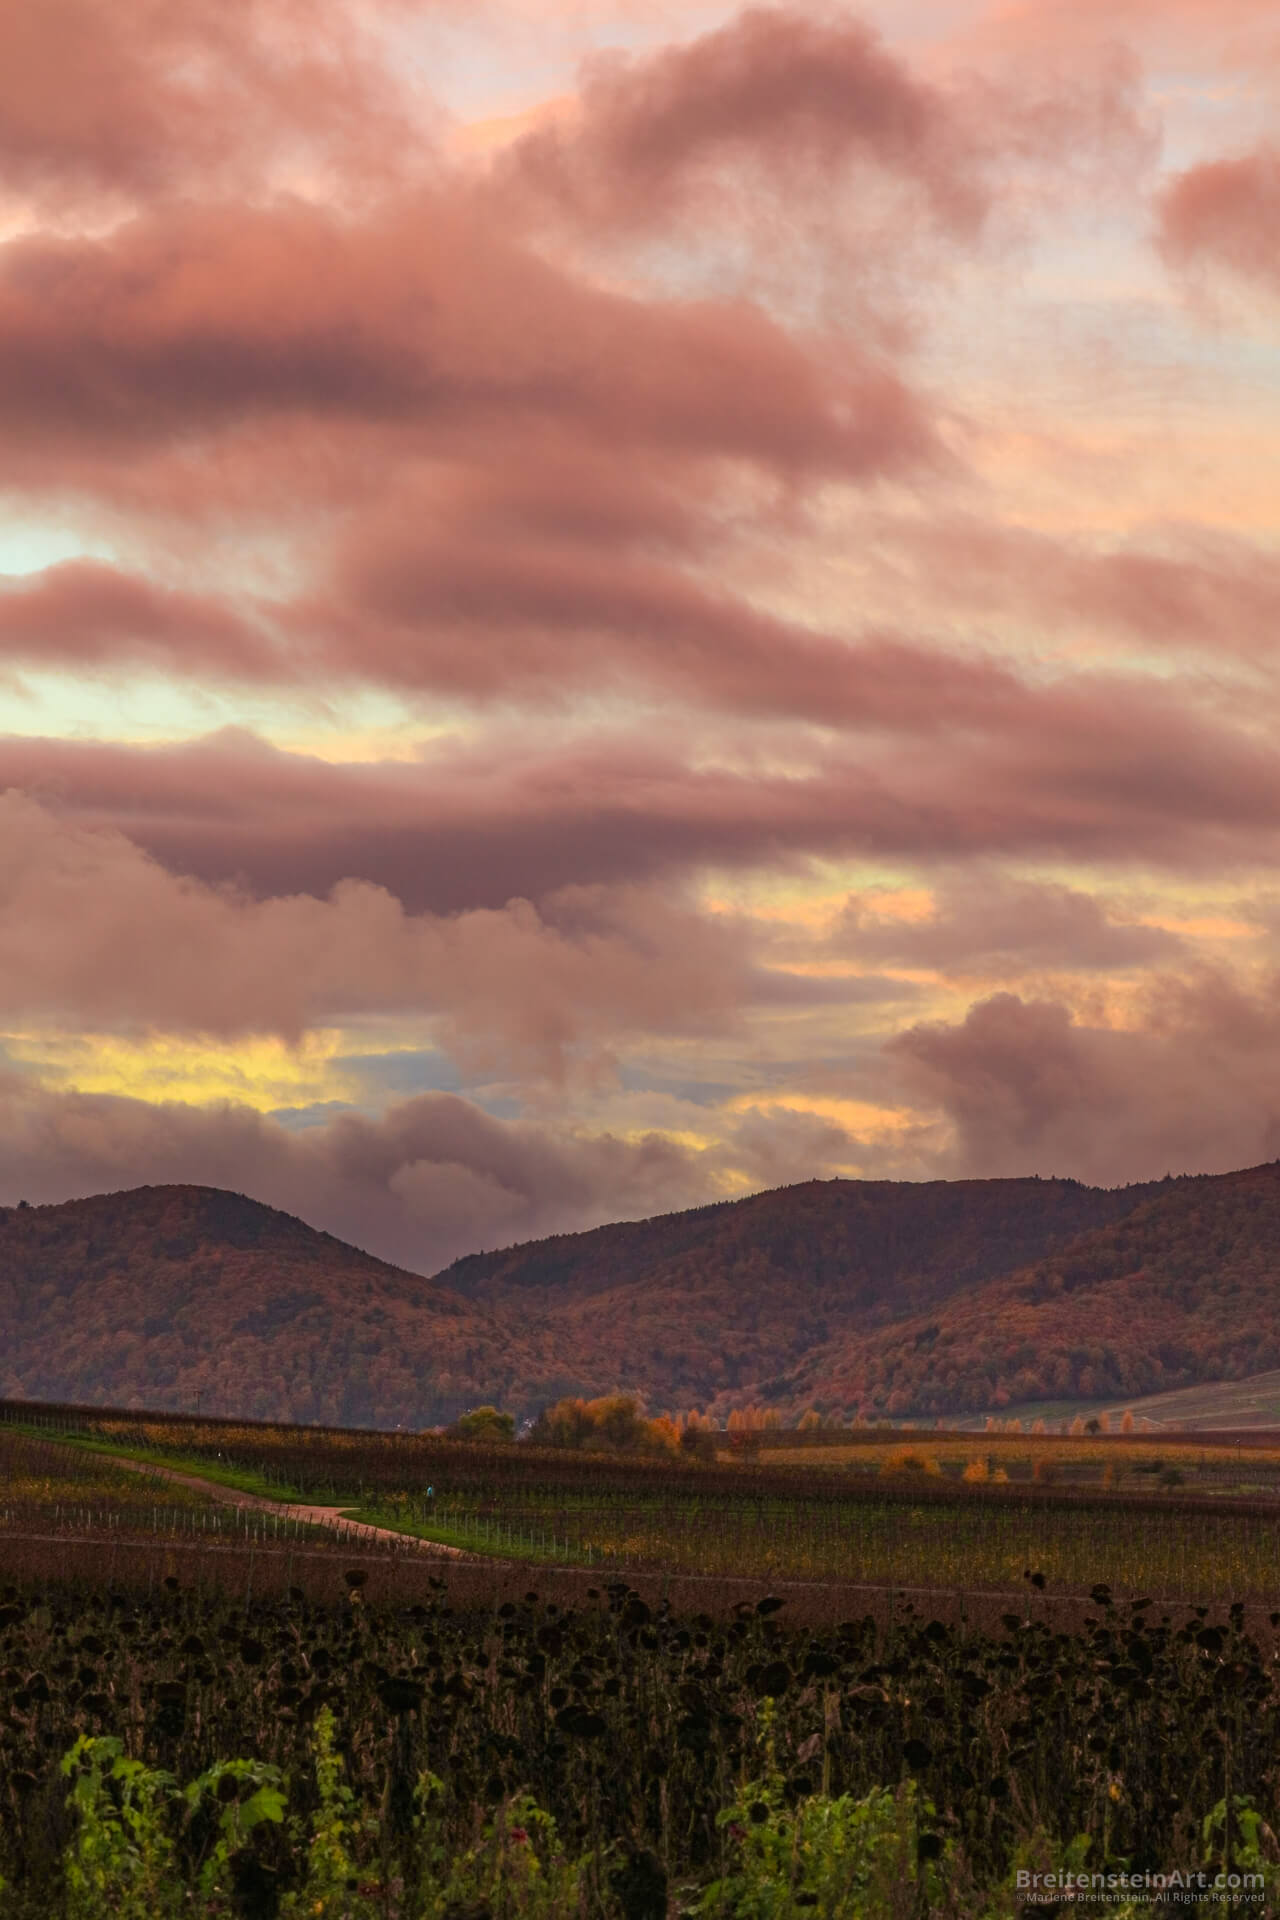 Endings, a photograph of a sunset with softly dramatic clouds, over mountains dense with autumn forests, low hills covered with late-season vineyards in the midground, and in the near foreground, a dark field of blackened sunflowers.